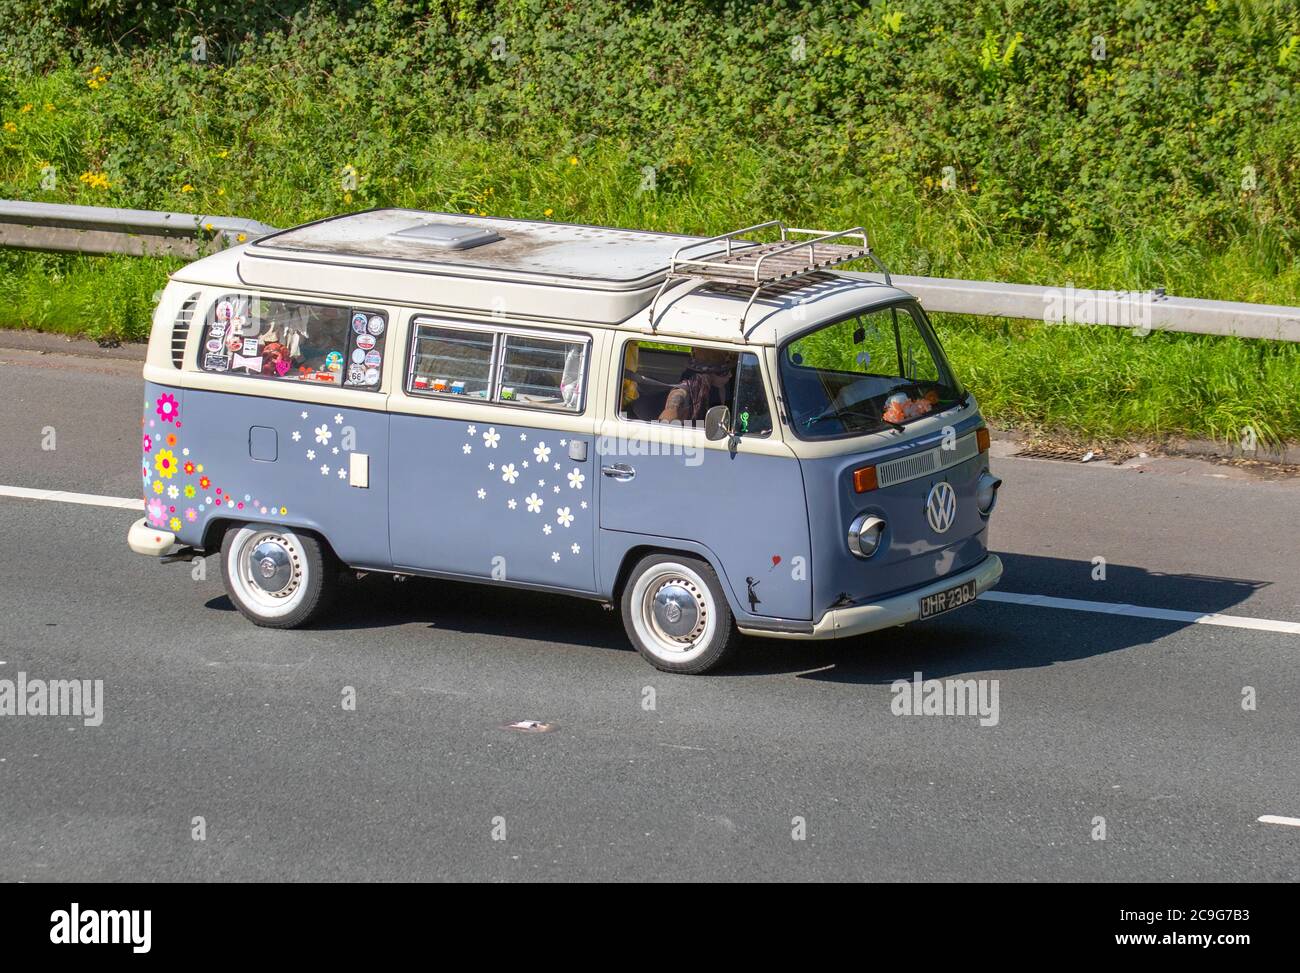 1971 70s seventies VW Volkswagen Microbus 8 Seater; Touring Caravans and Motorhomes, campervans on Britain's roads, RV leisure vehicle, family holidays, caravanette vacations, caravan holiday, van conversions, autohome, 1960s Flower Power, motorhome on the road UK Stock Photo